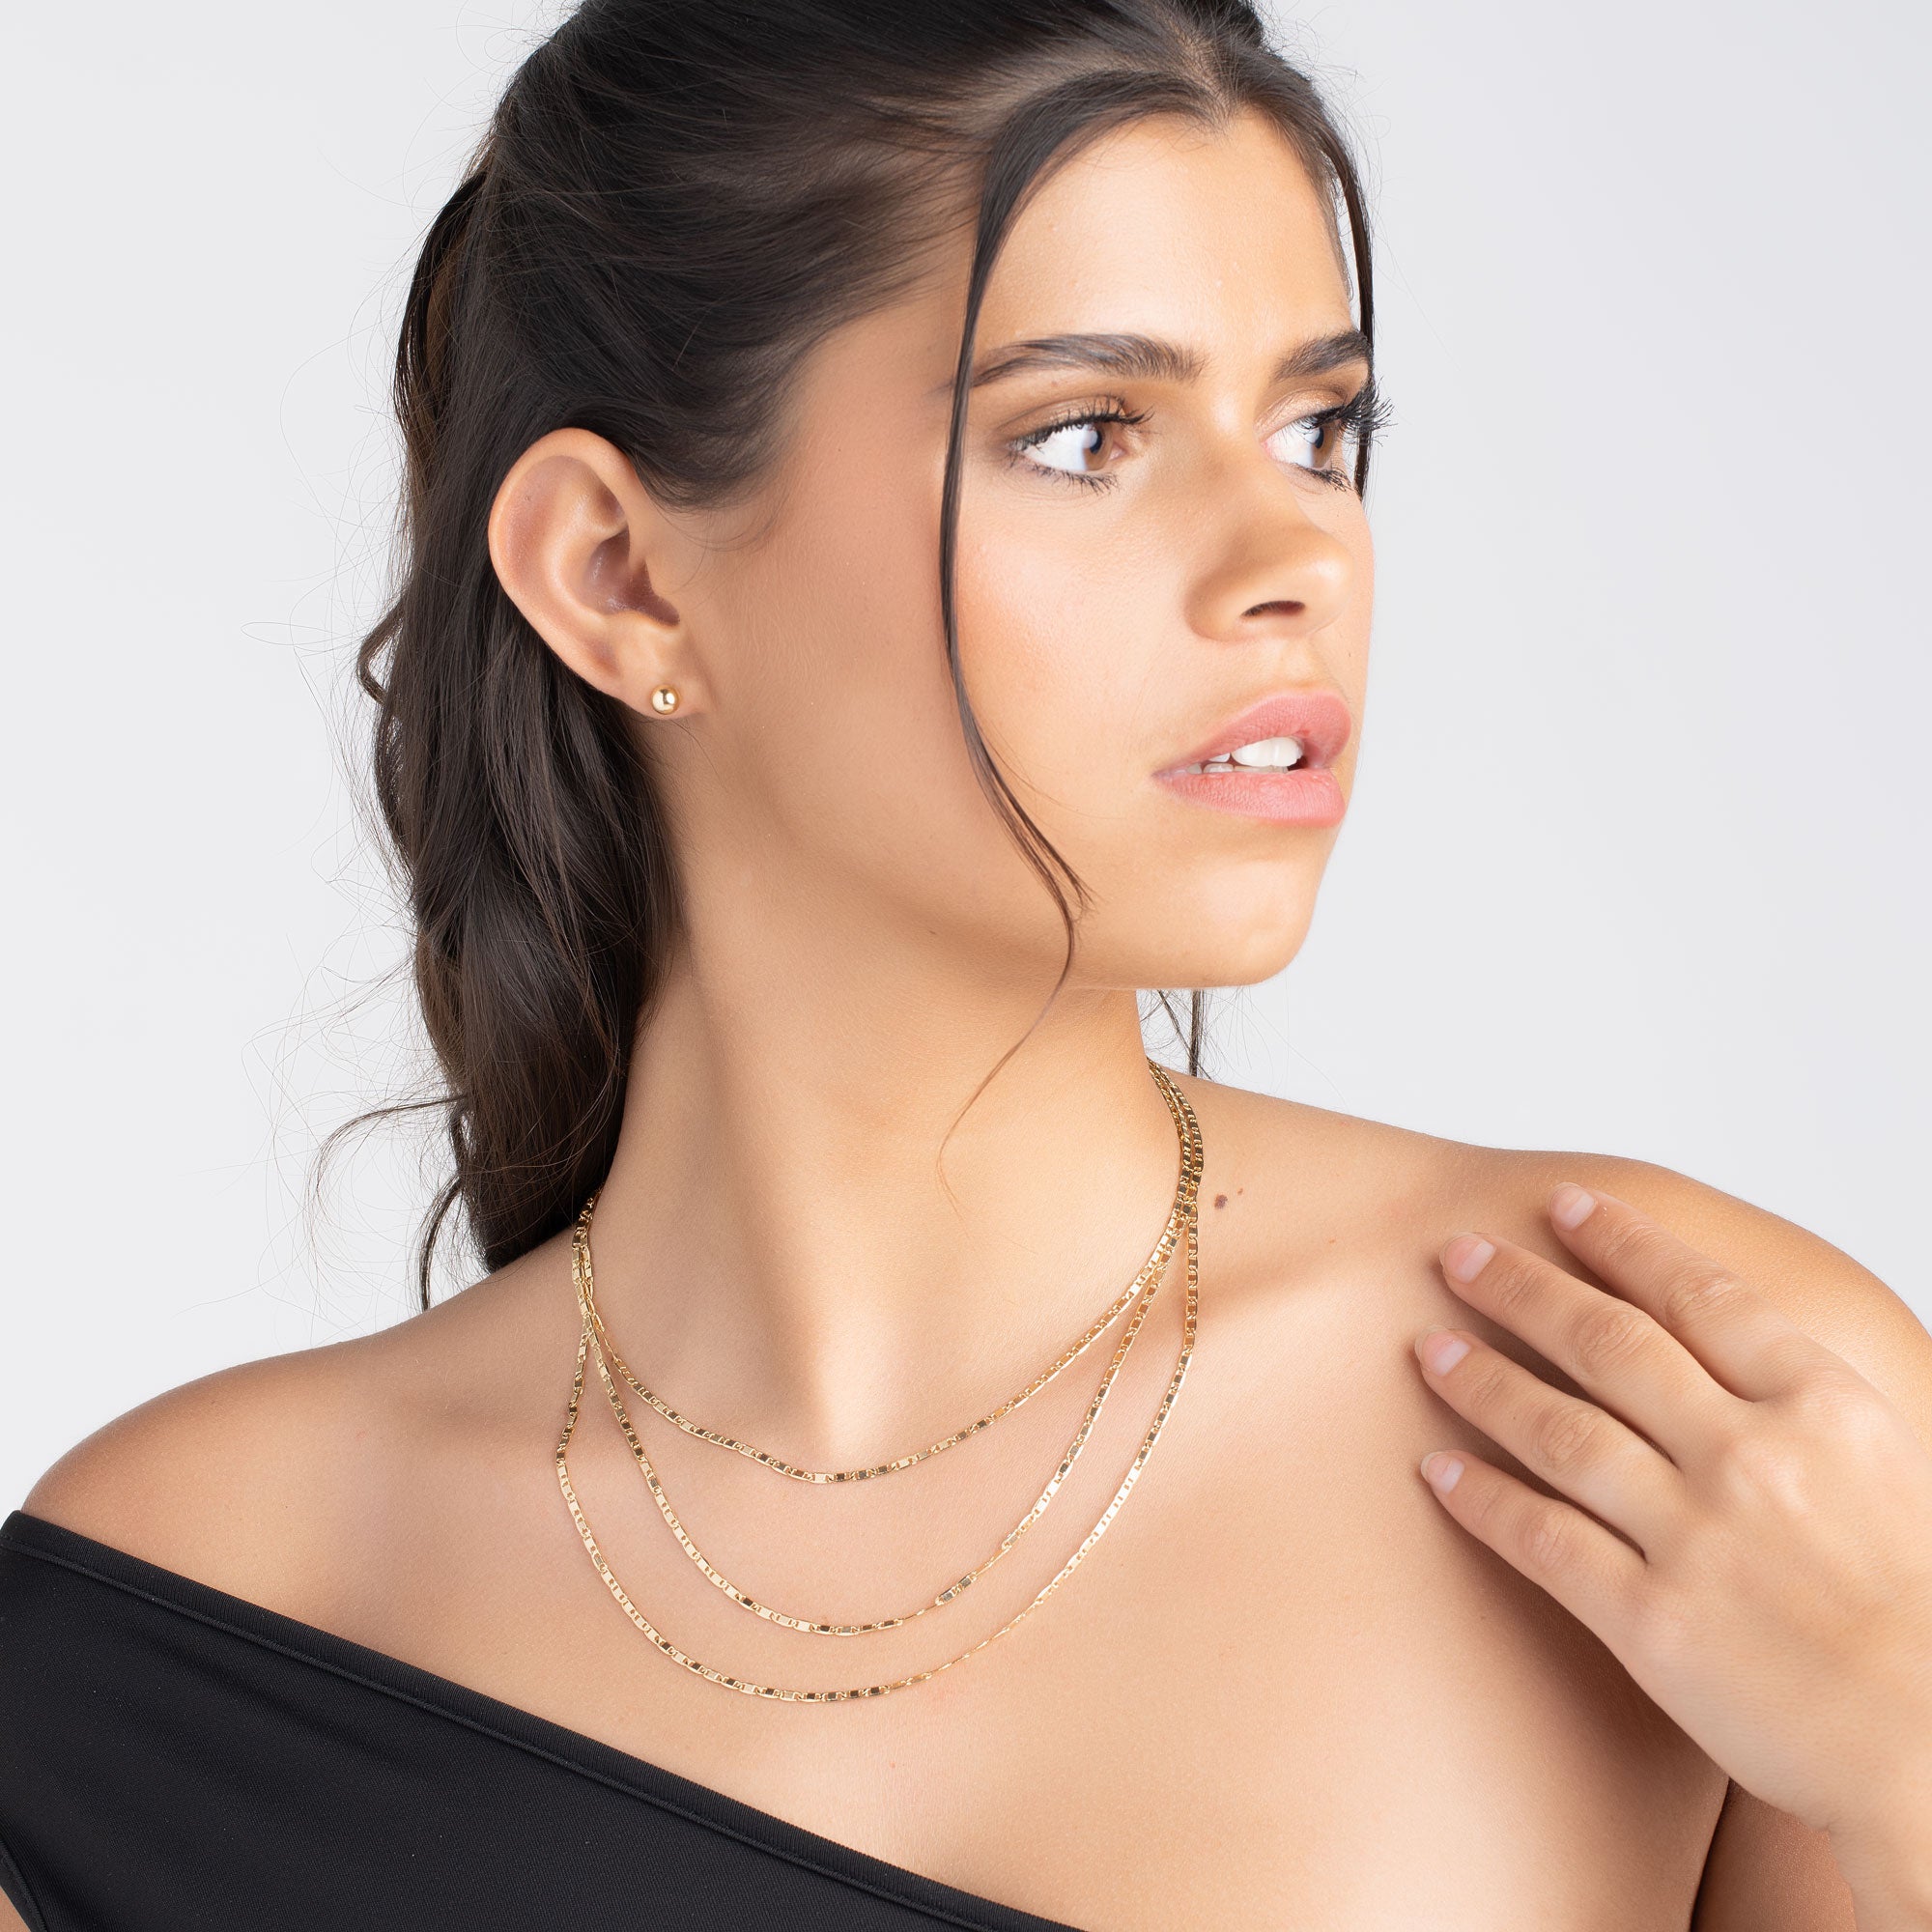 18K Gold Plated Mariner Layered Necklace, 16-20 inches, with a 2 inch extension